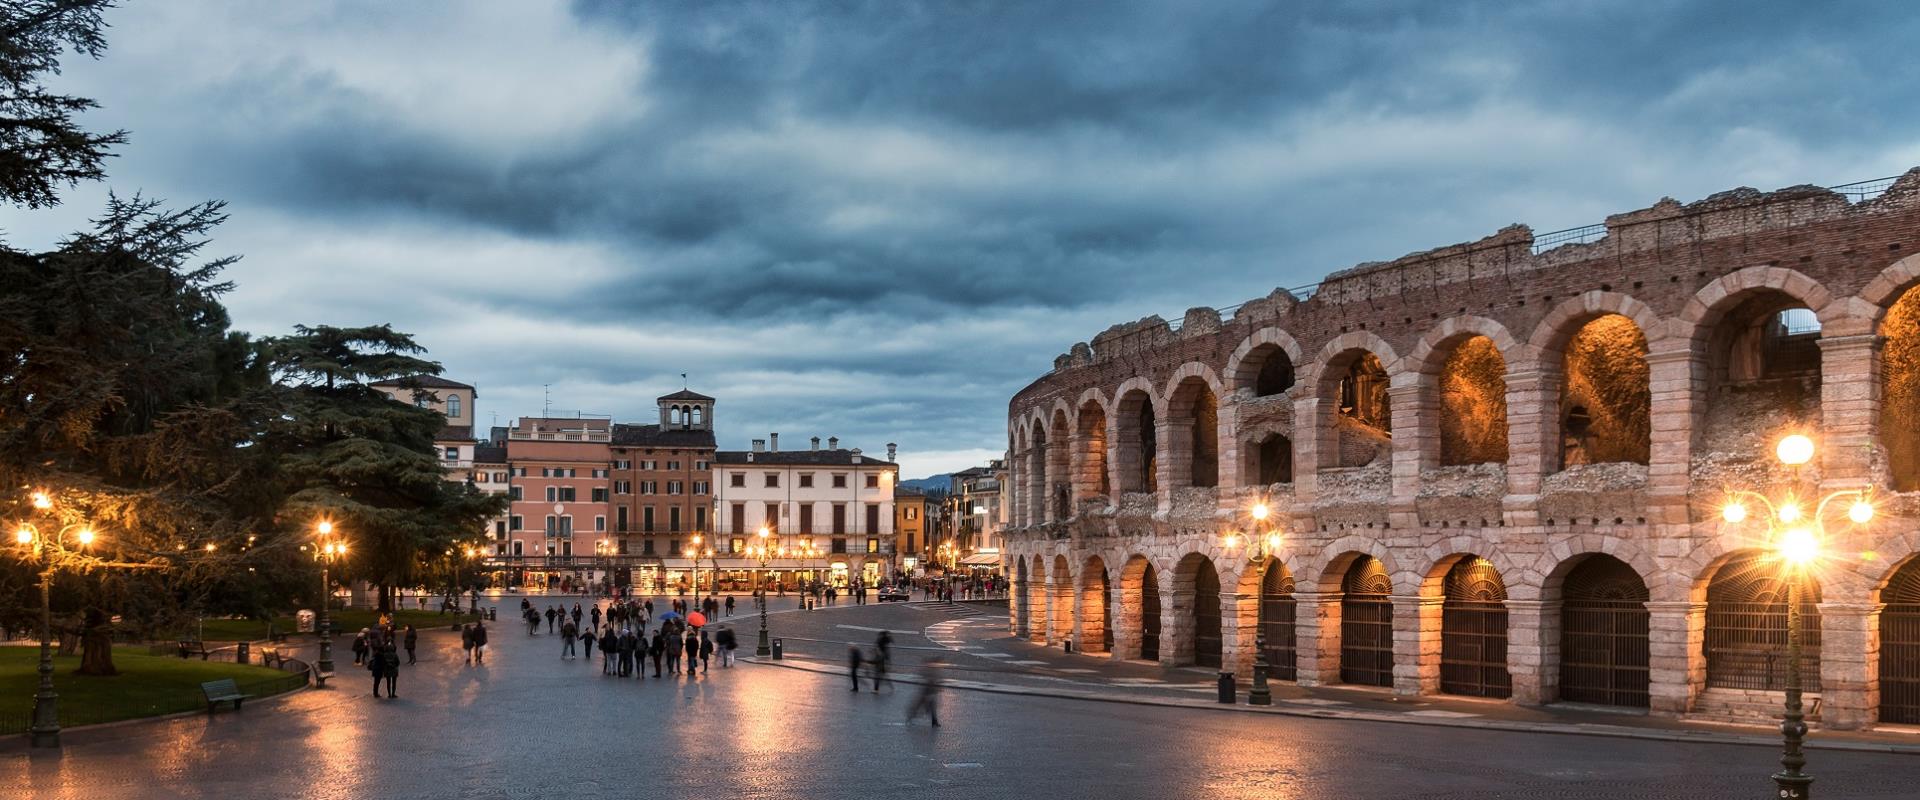 Discover the historic center of Verona, just a few minutes from our hotel!